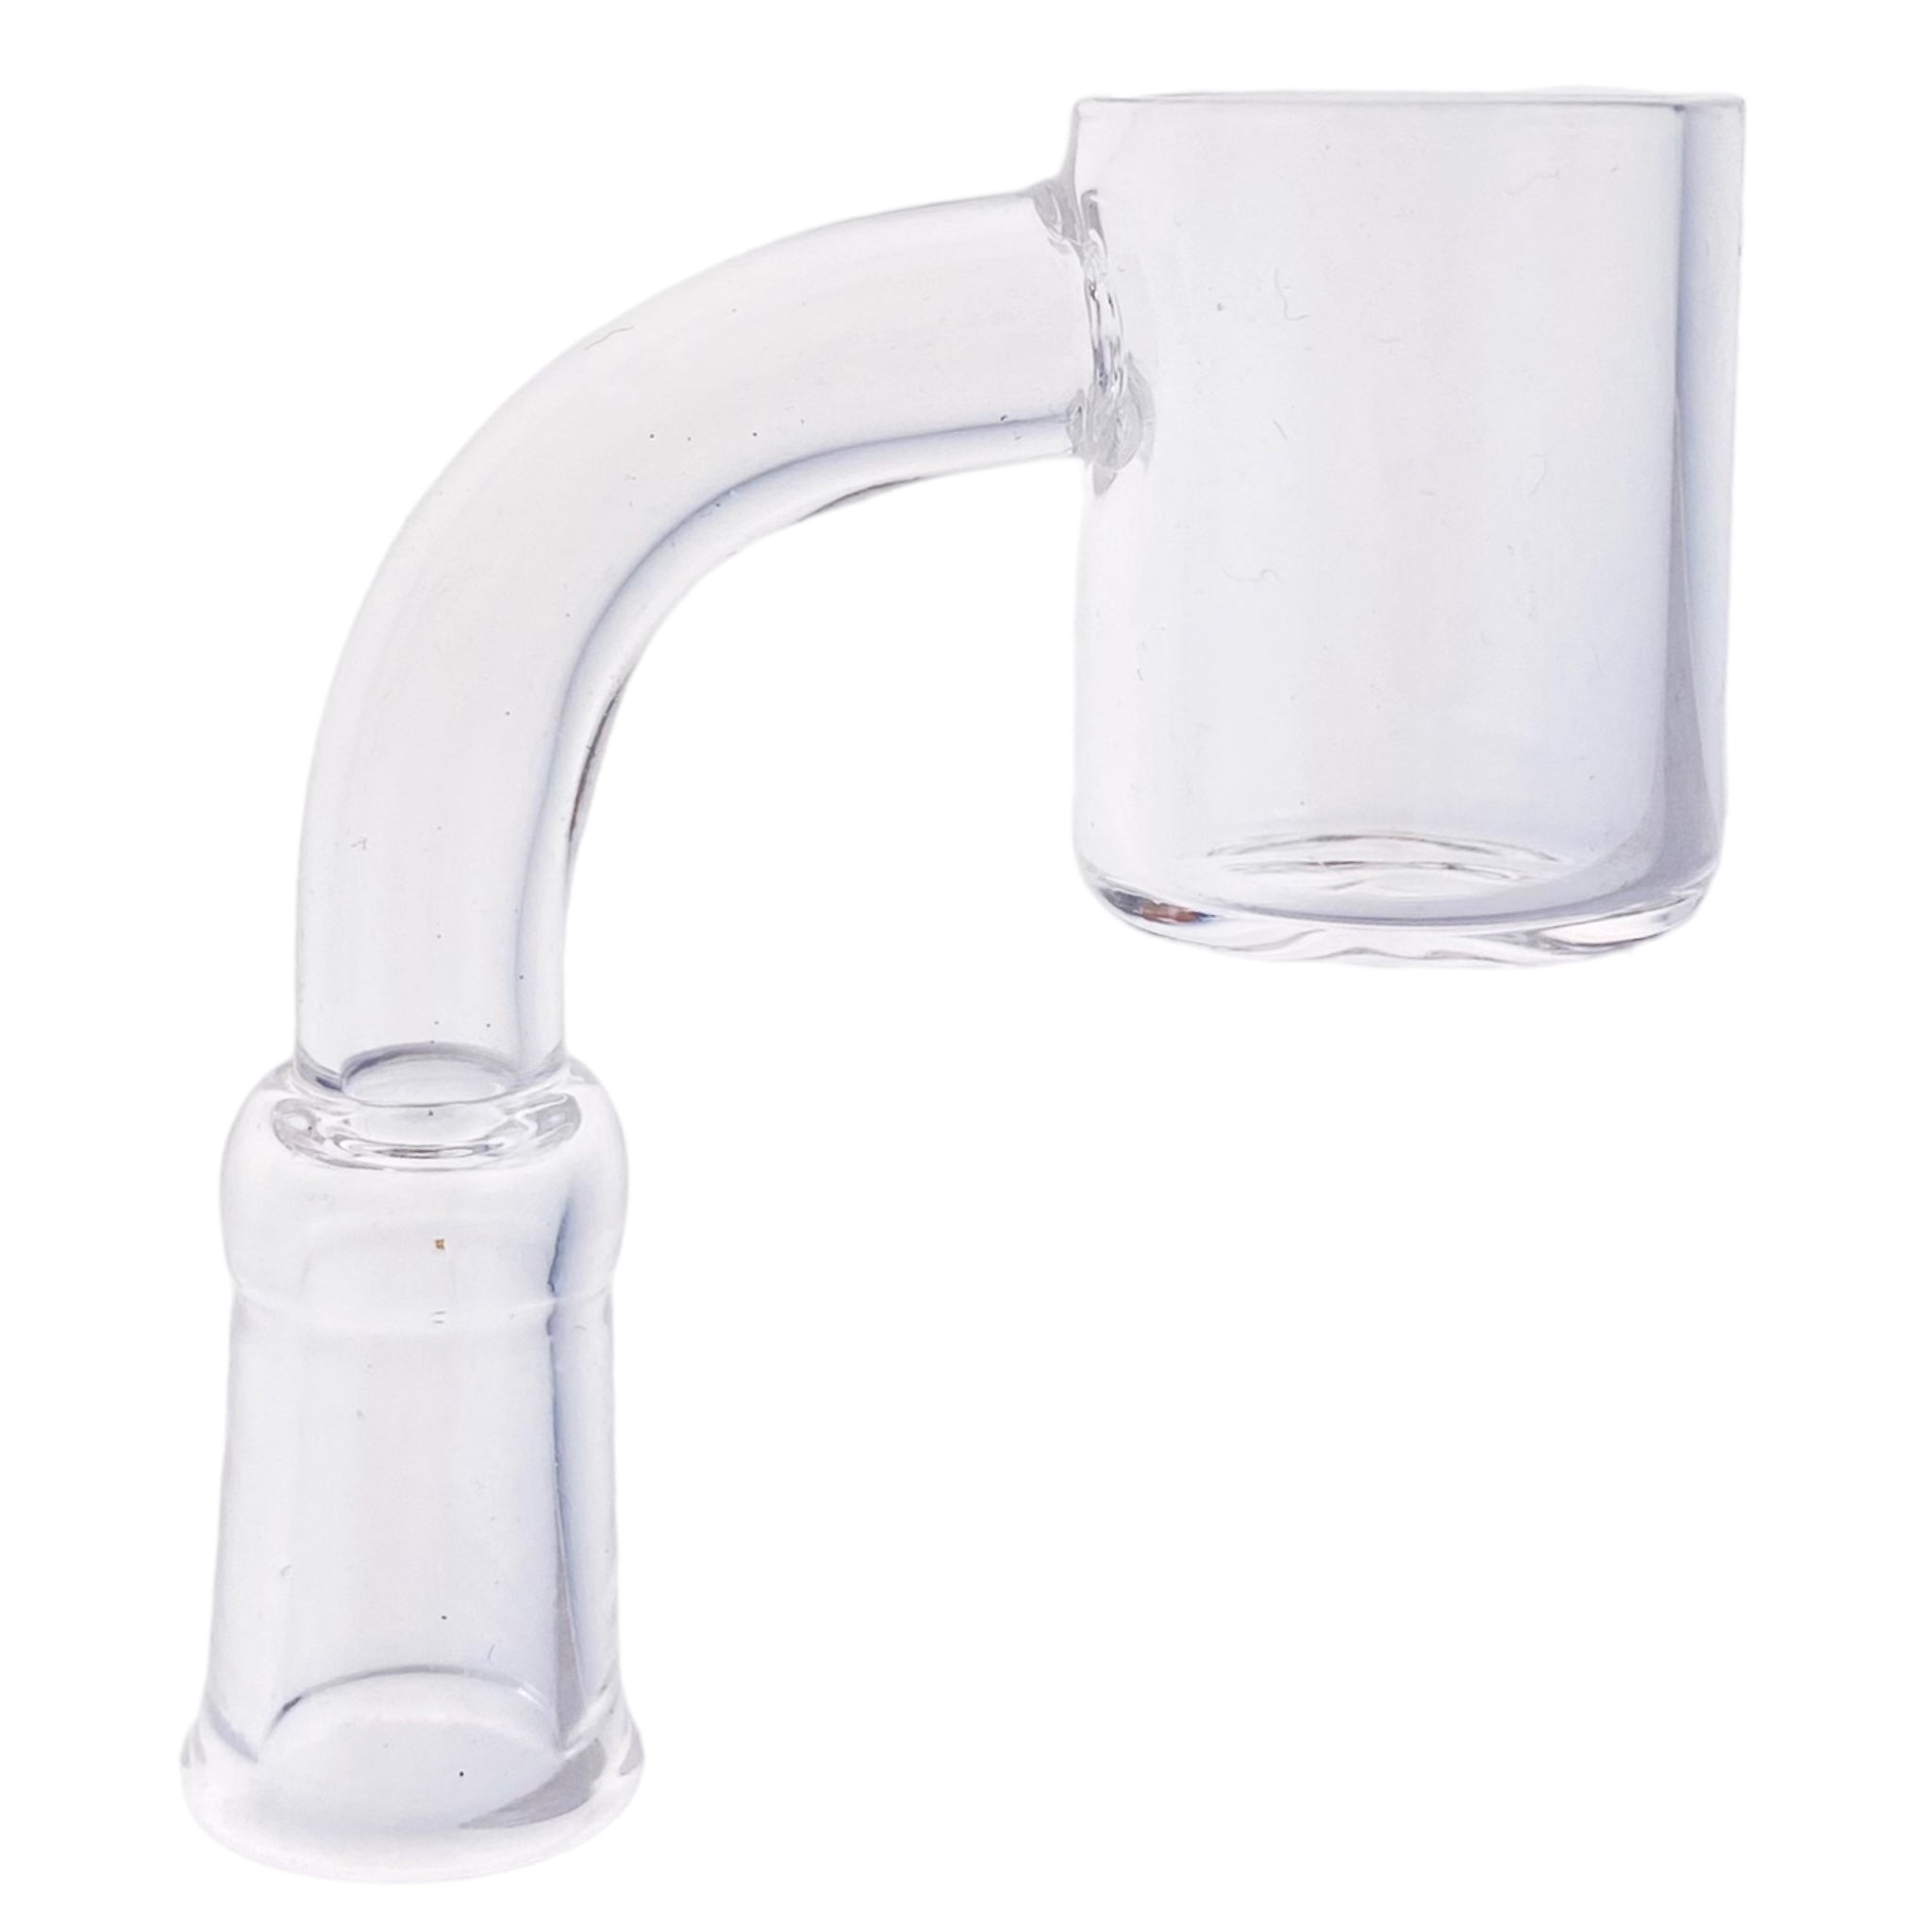 10mm Quartz Banger With 90 Degree Female Fitting And 20mm Wide Bucket